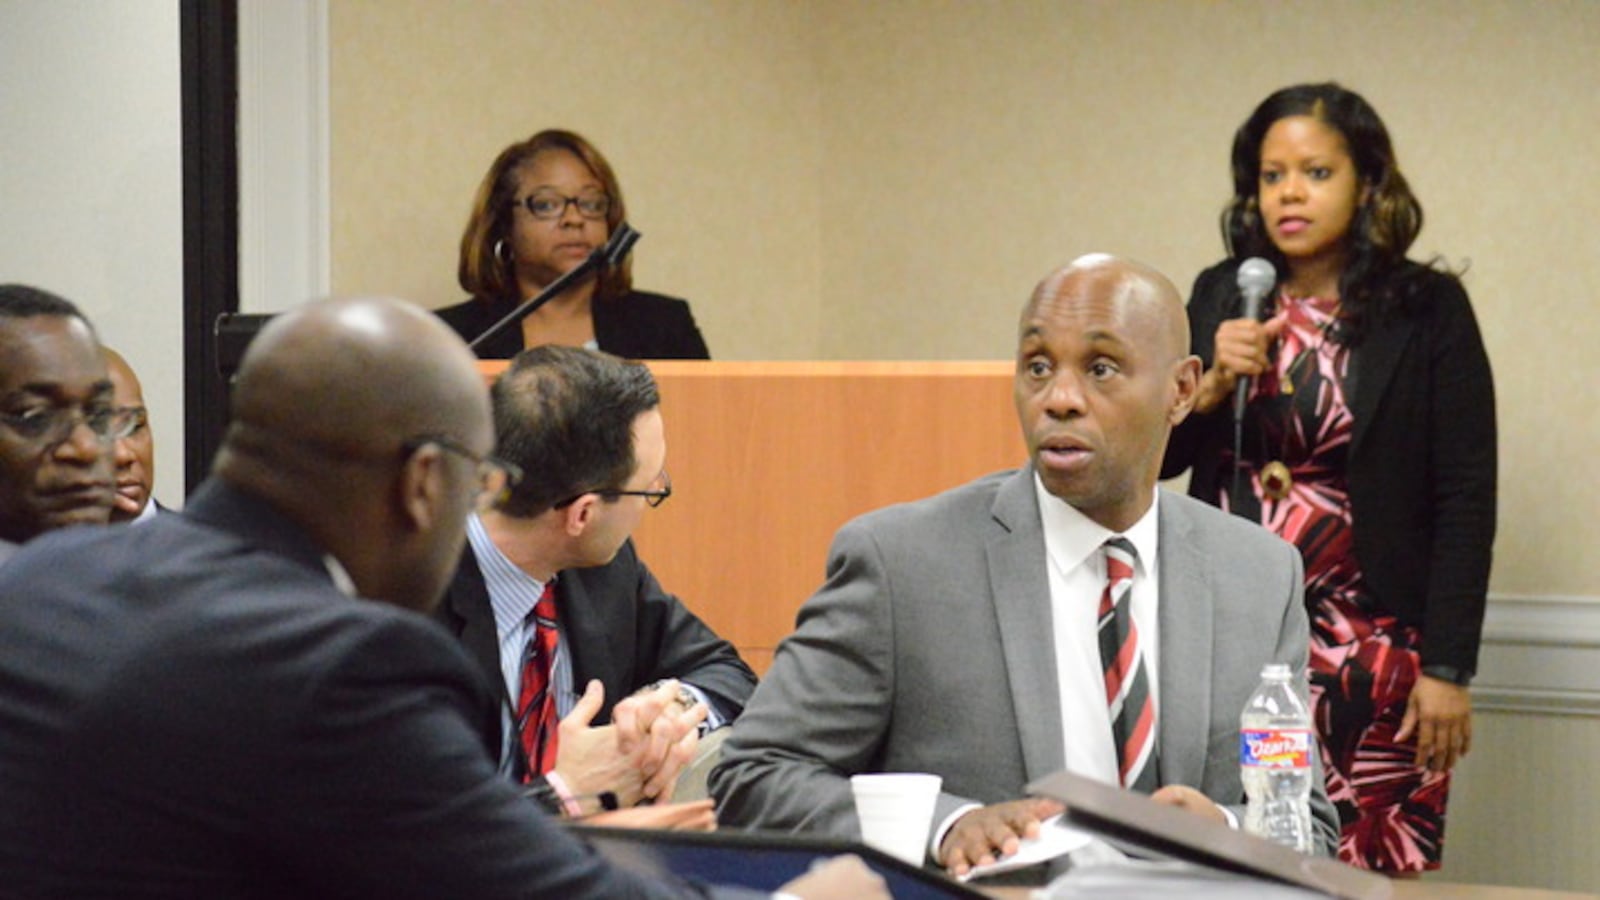 Superintendent Dorsey Hopson confers with staff.